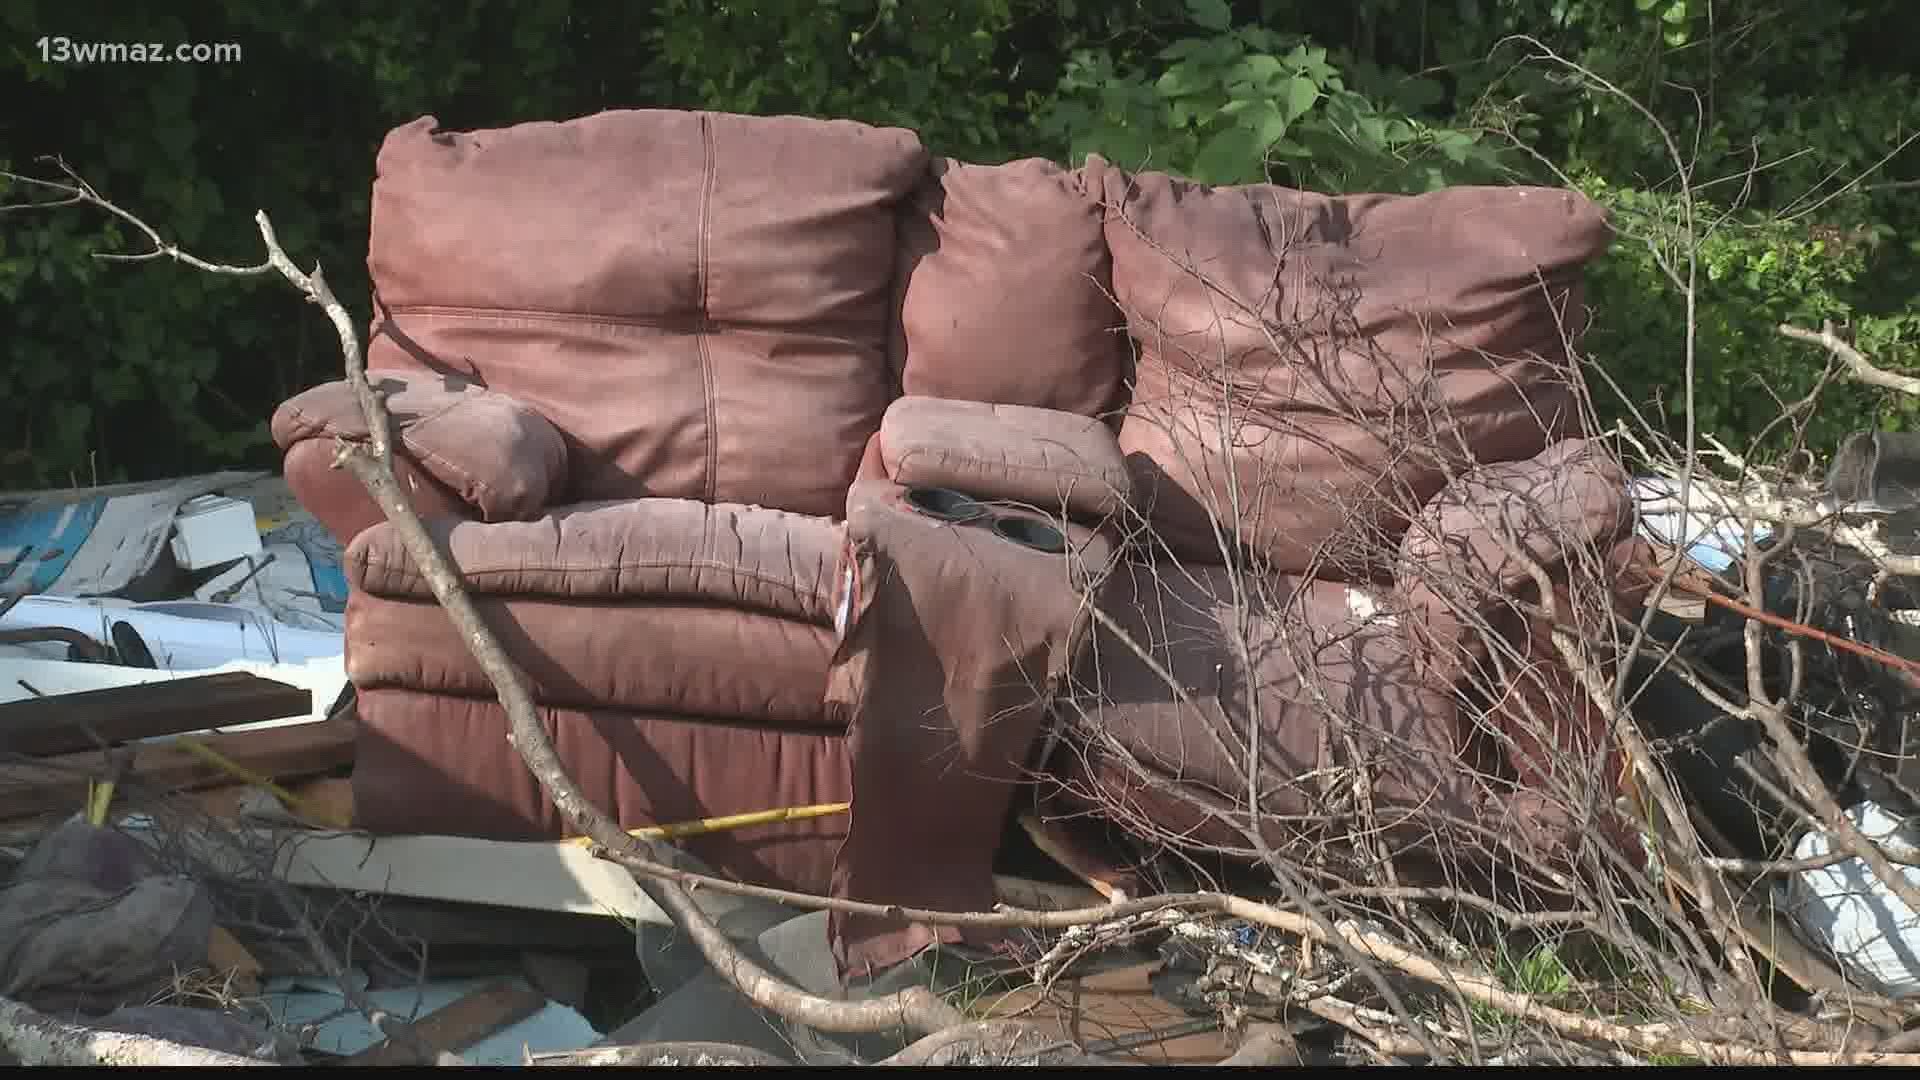 Some people from the Unionville neighborhood say they're fed up with people turning their community into the city dump, a location with a history of illegal dumping.